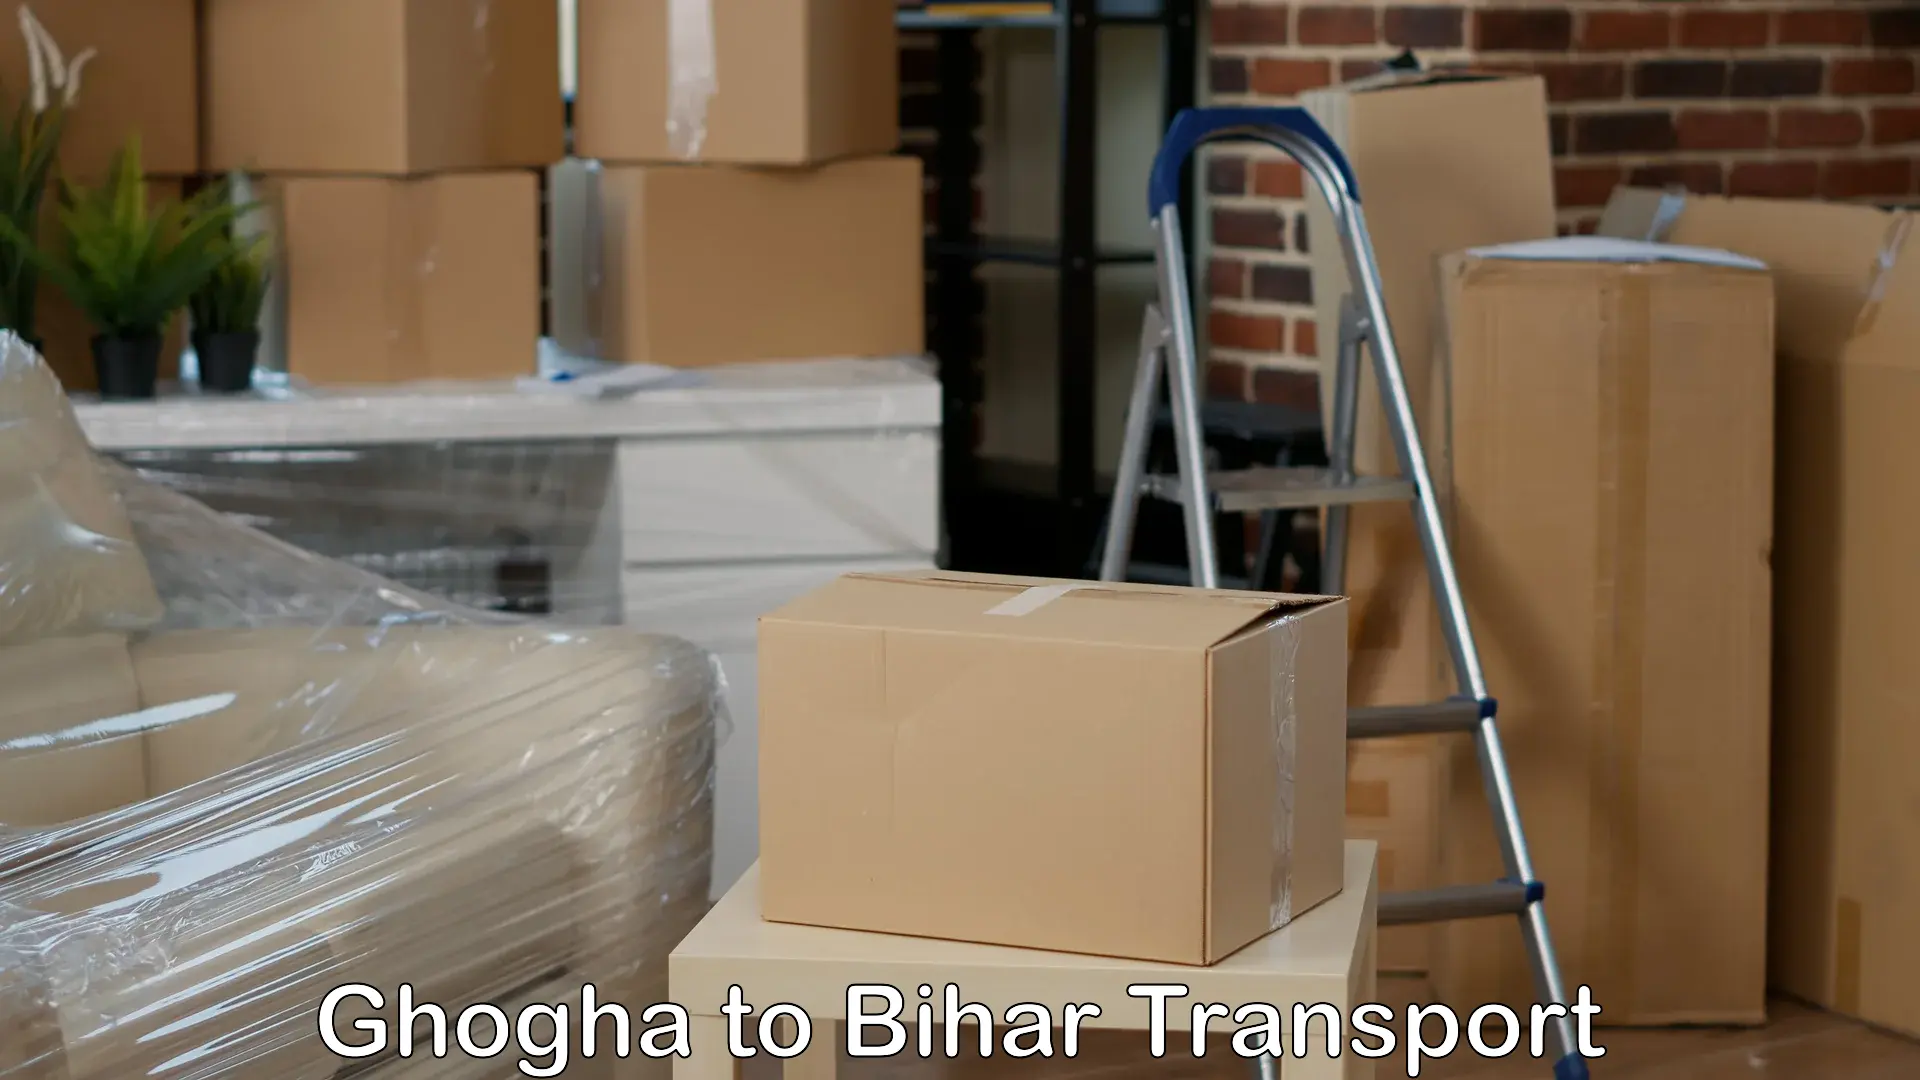 Commercial transport service Ghogha to Piro